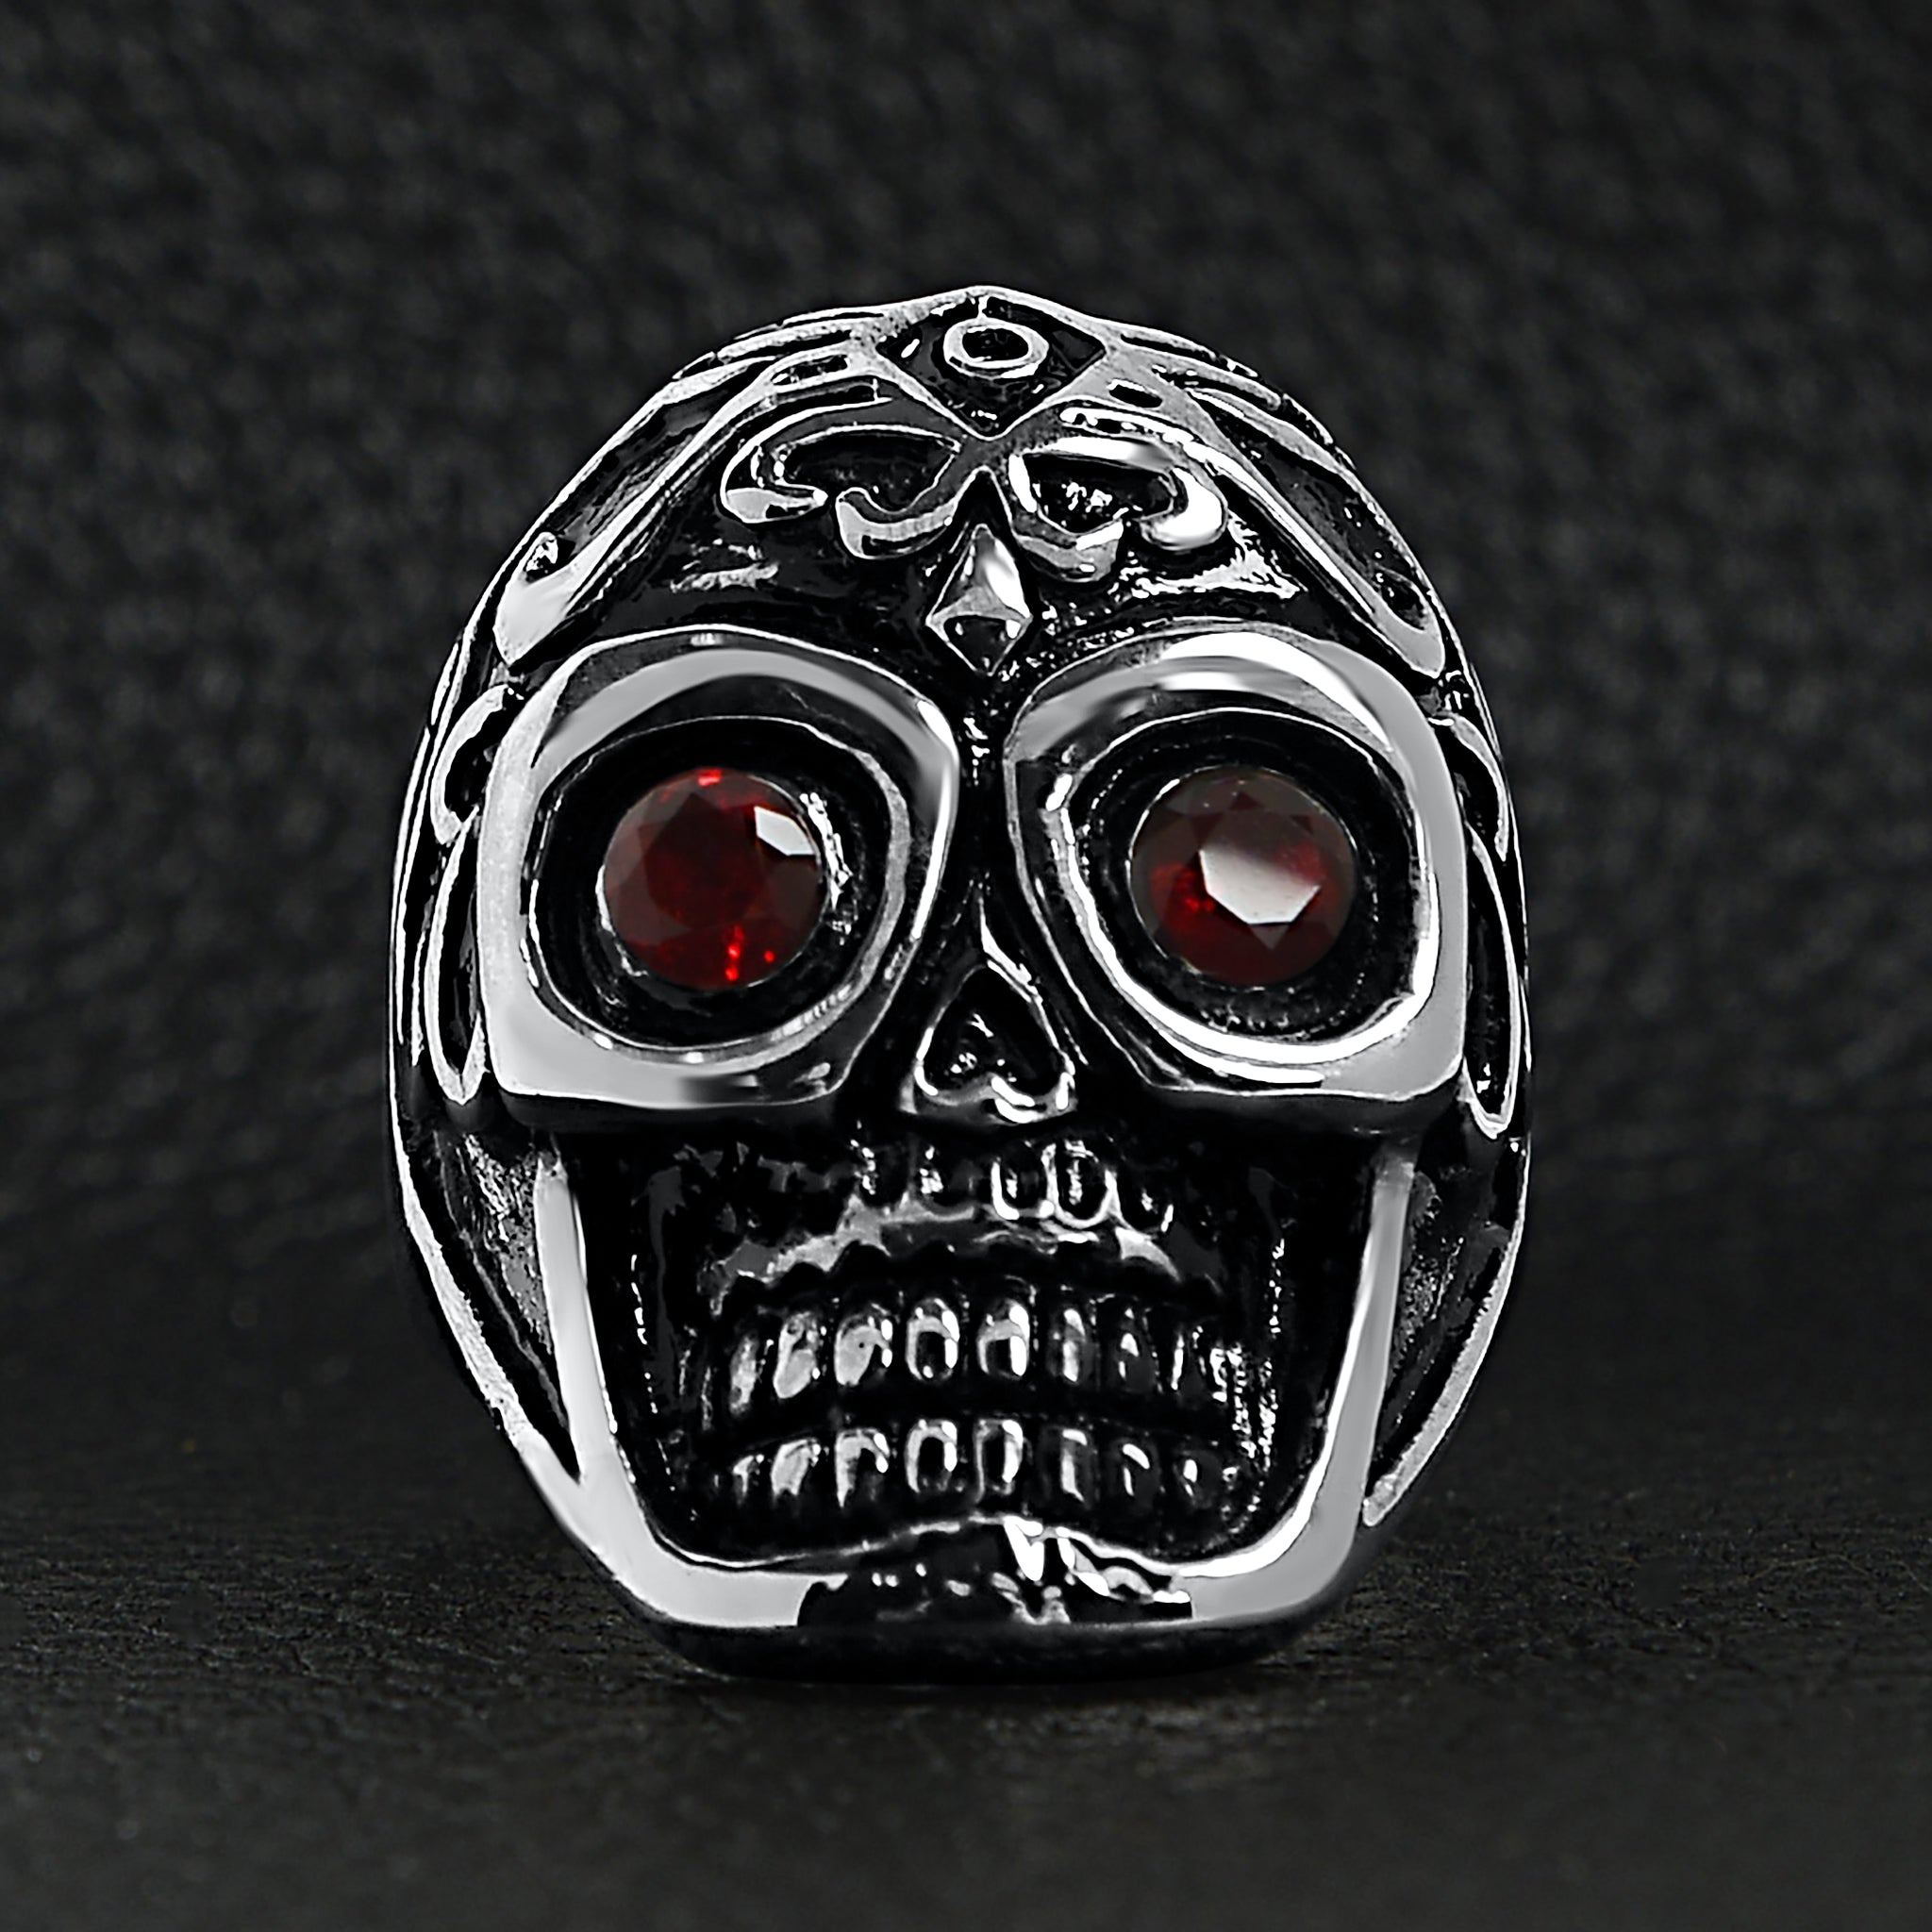 Polished Stainless Steel Skull Ring with Red CZ Eyes - Hypoallergenic and Durable - Jewelry & Watches - Bijou Her -  -  - 